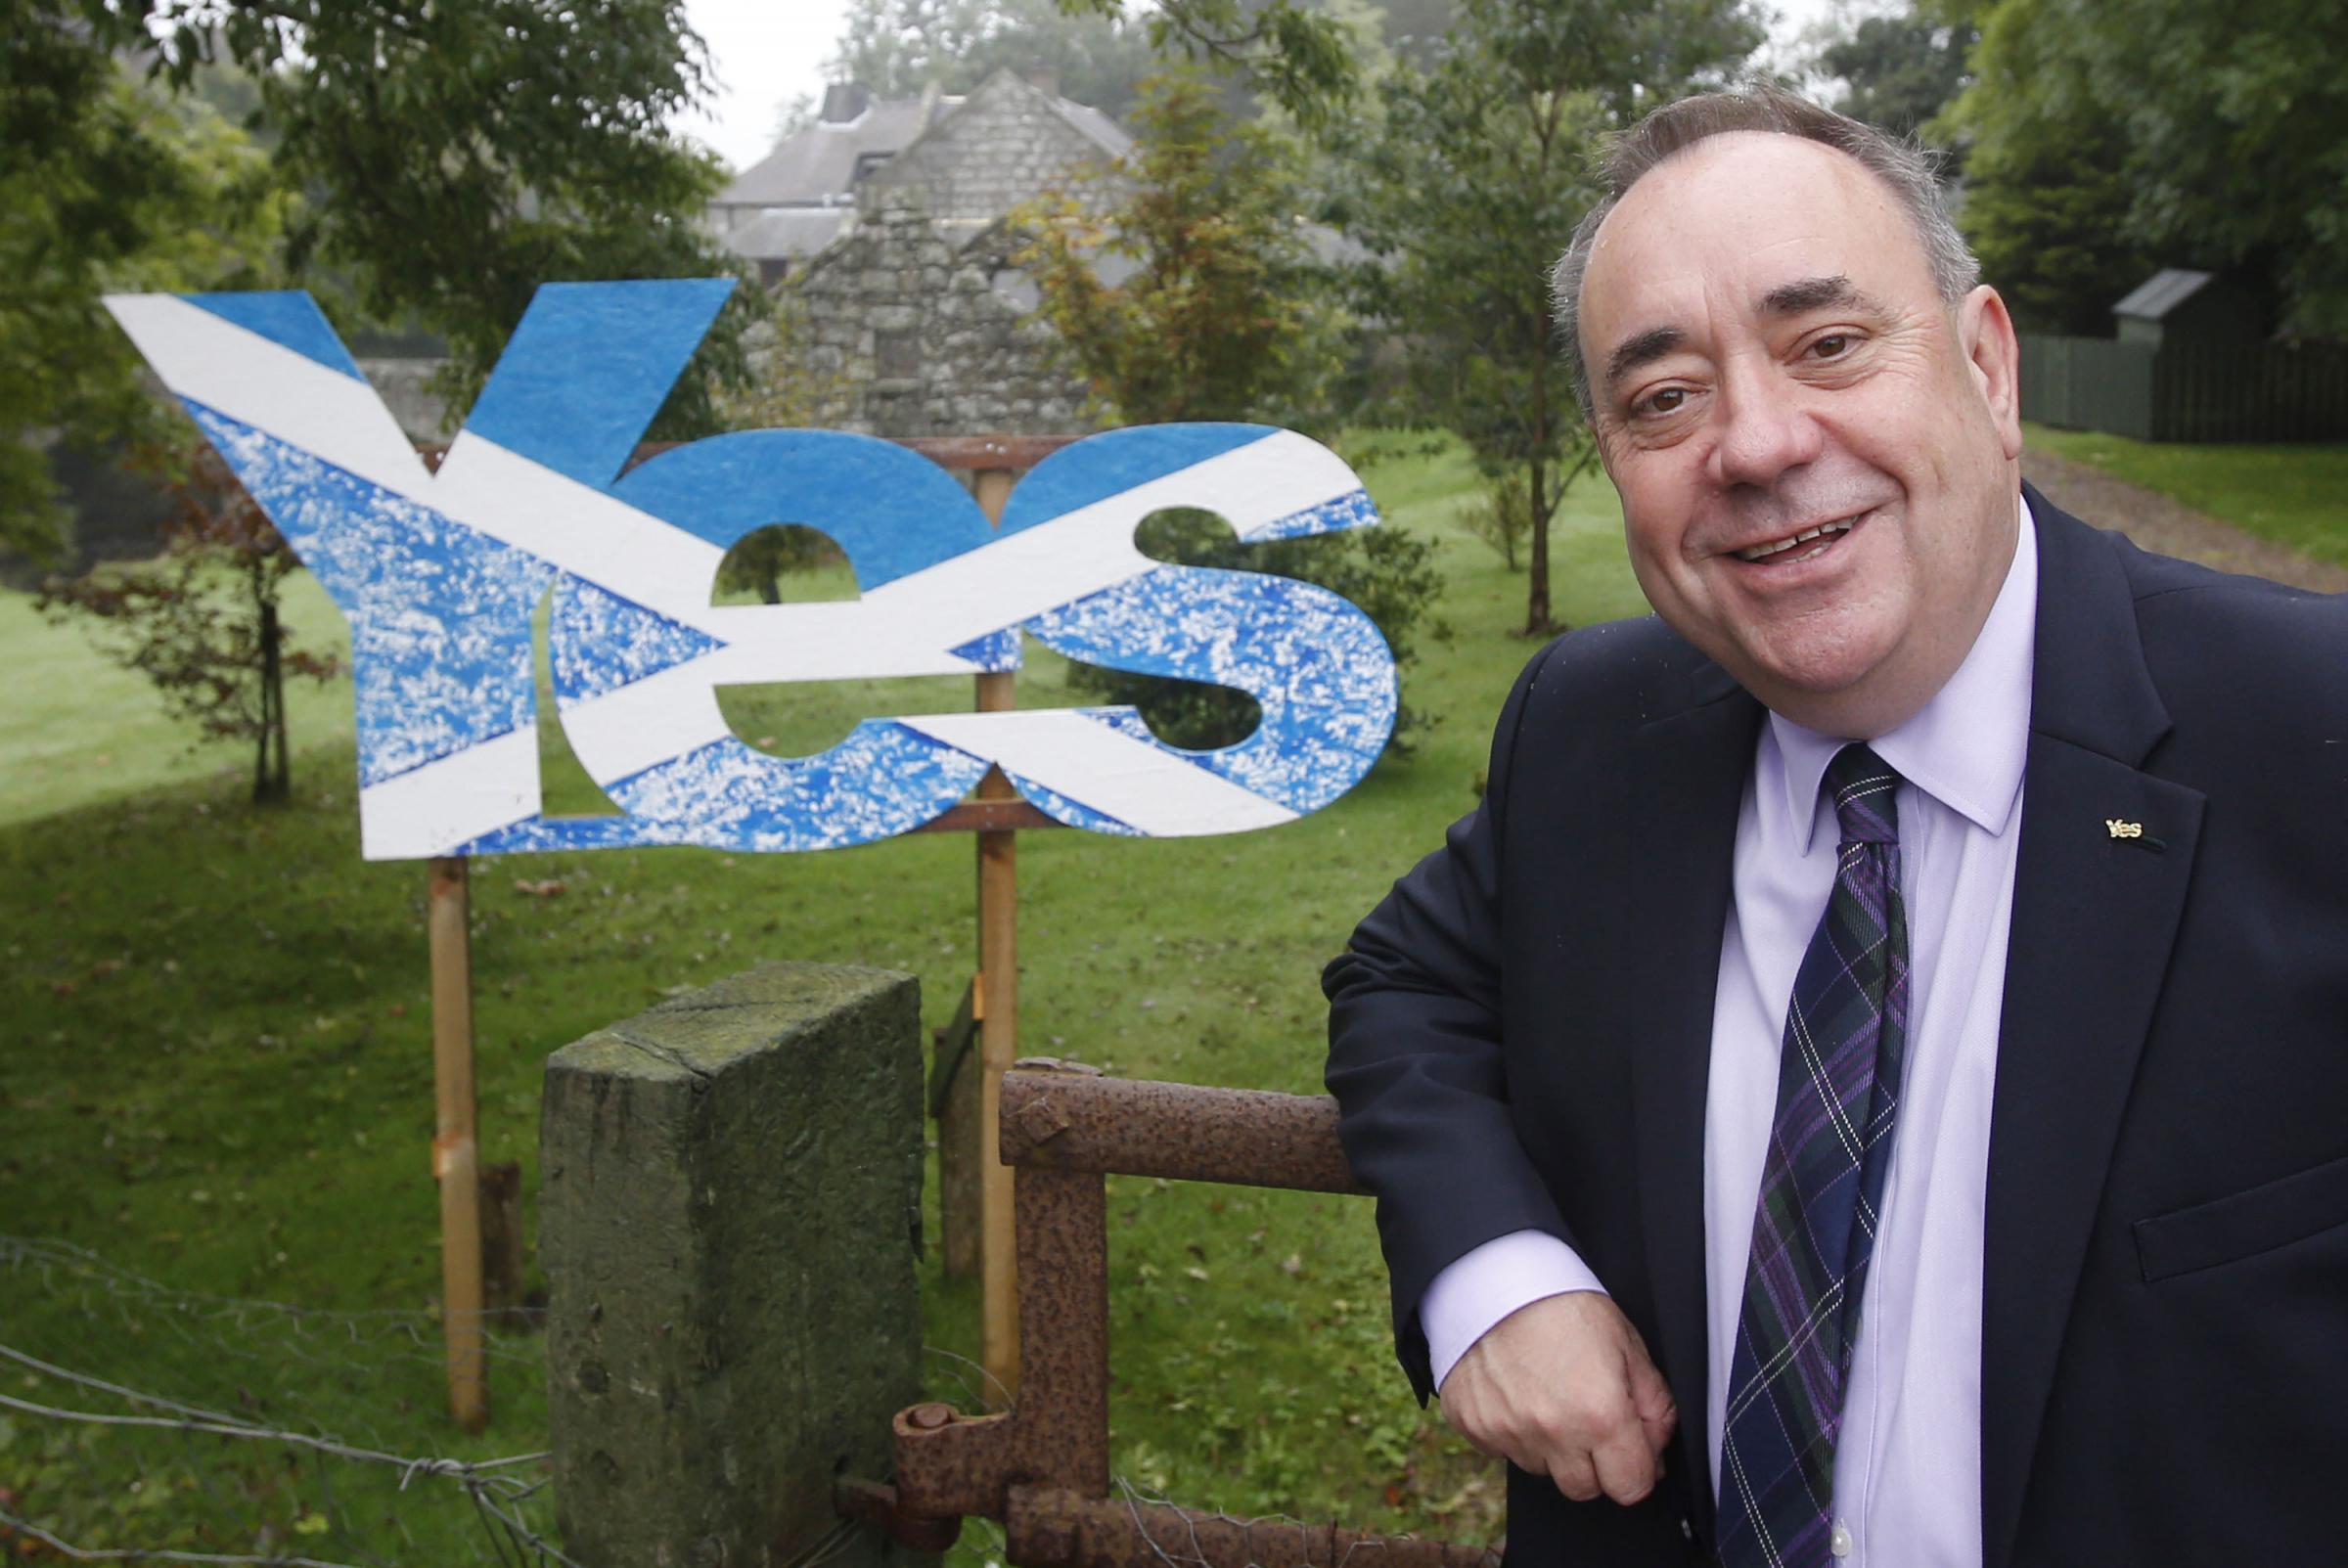 Whoever leads the Yes or No campaigns could tip balance on independence, says  Christian Harrison